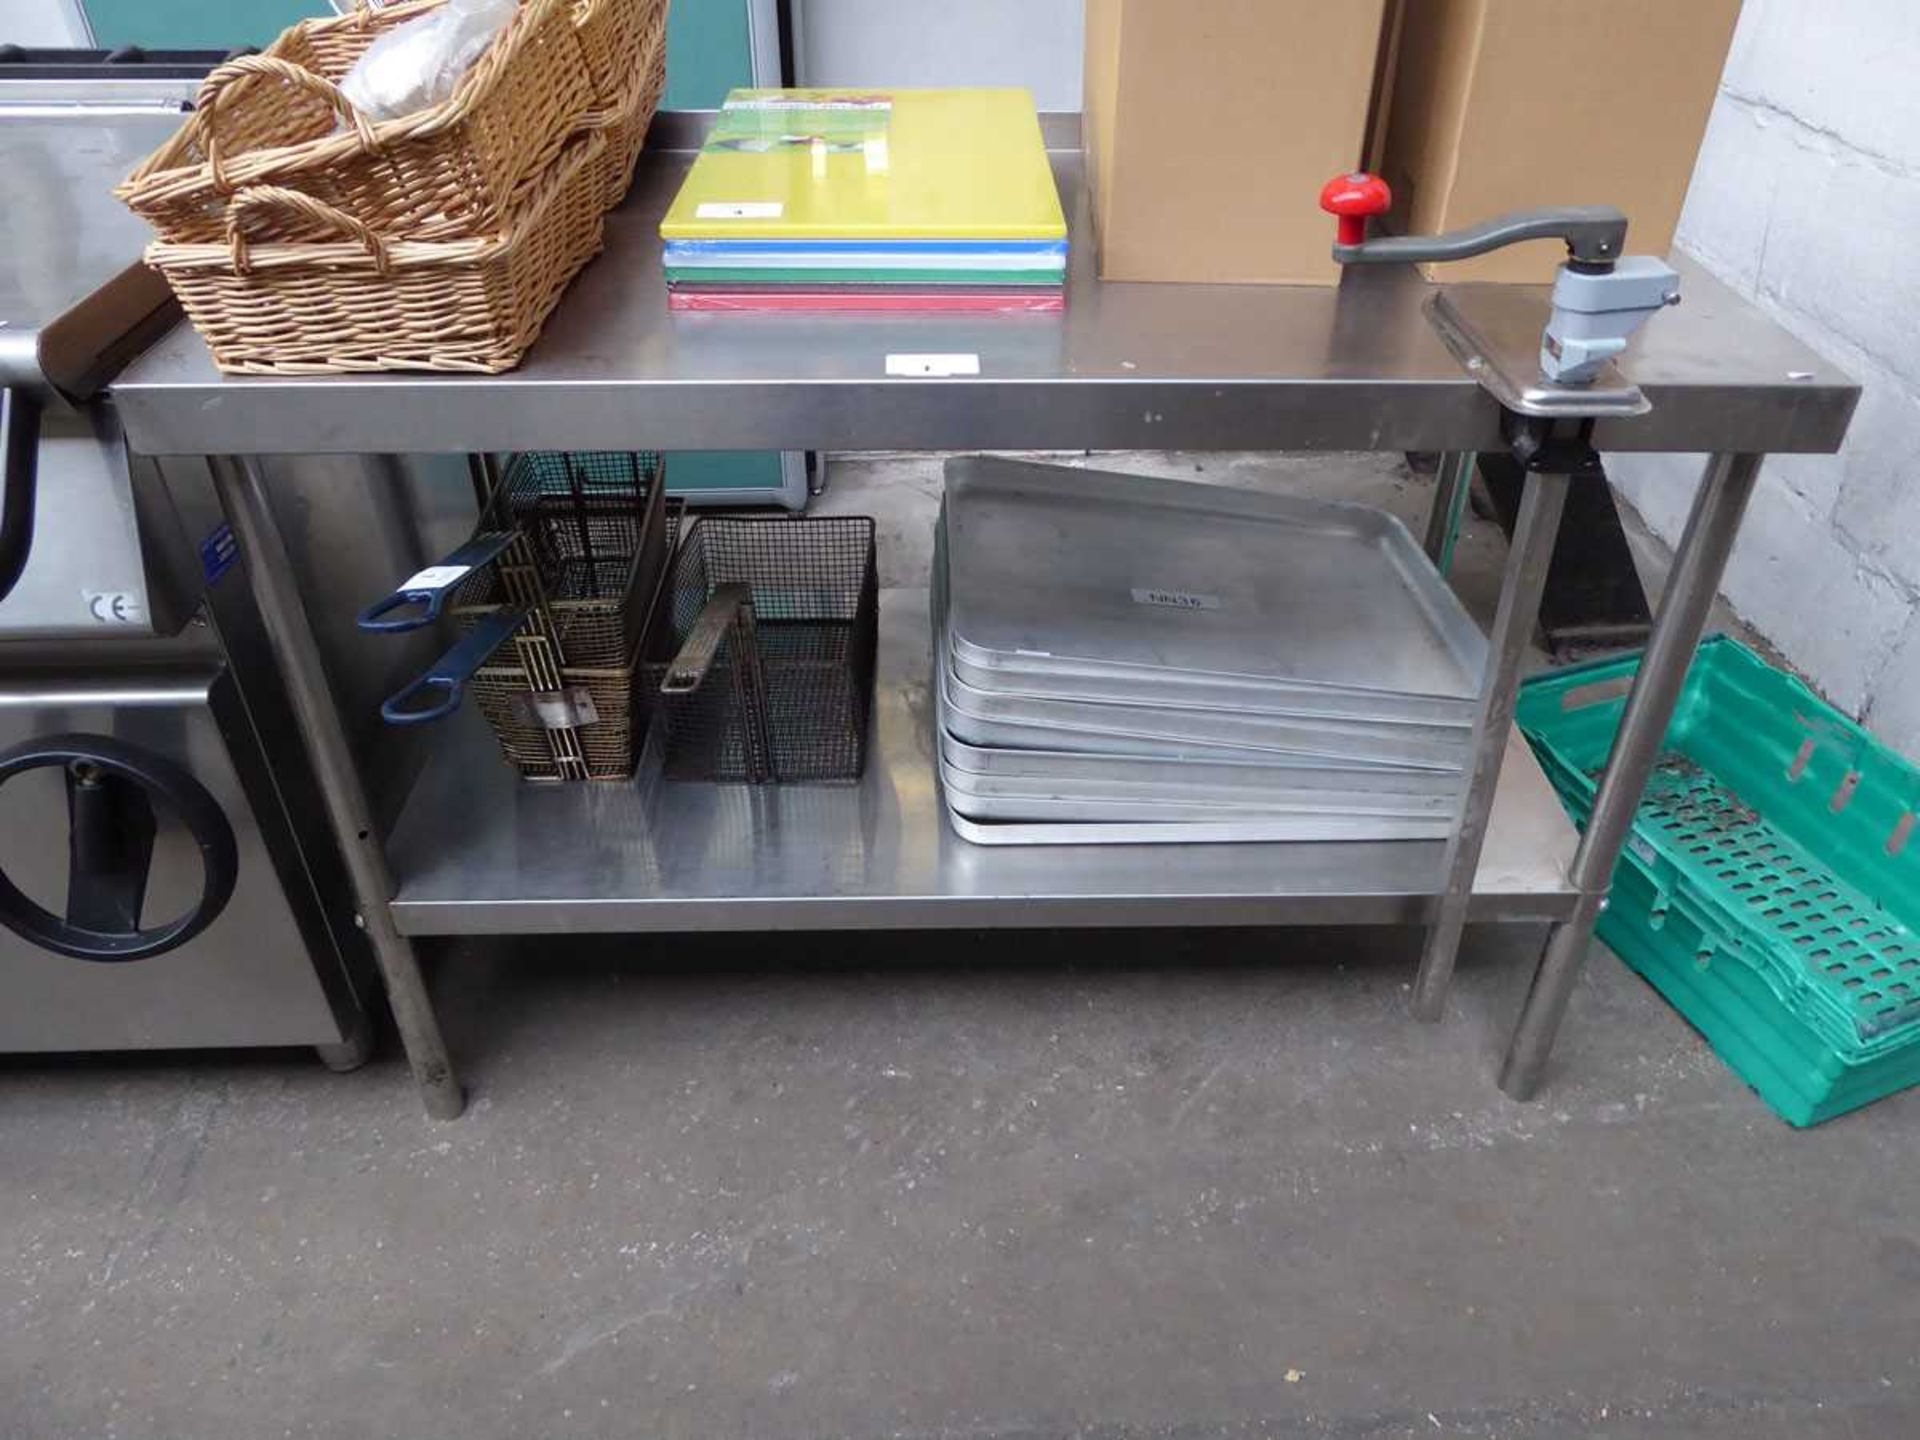 +VAT 120cm stainless steel preparation table with shelf under and attached can opener